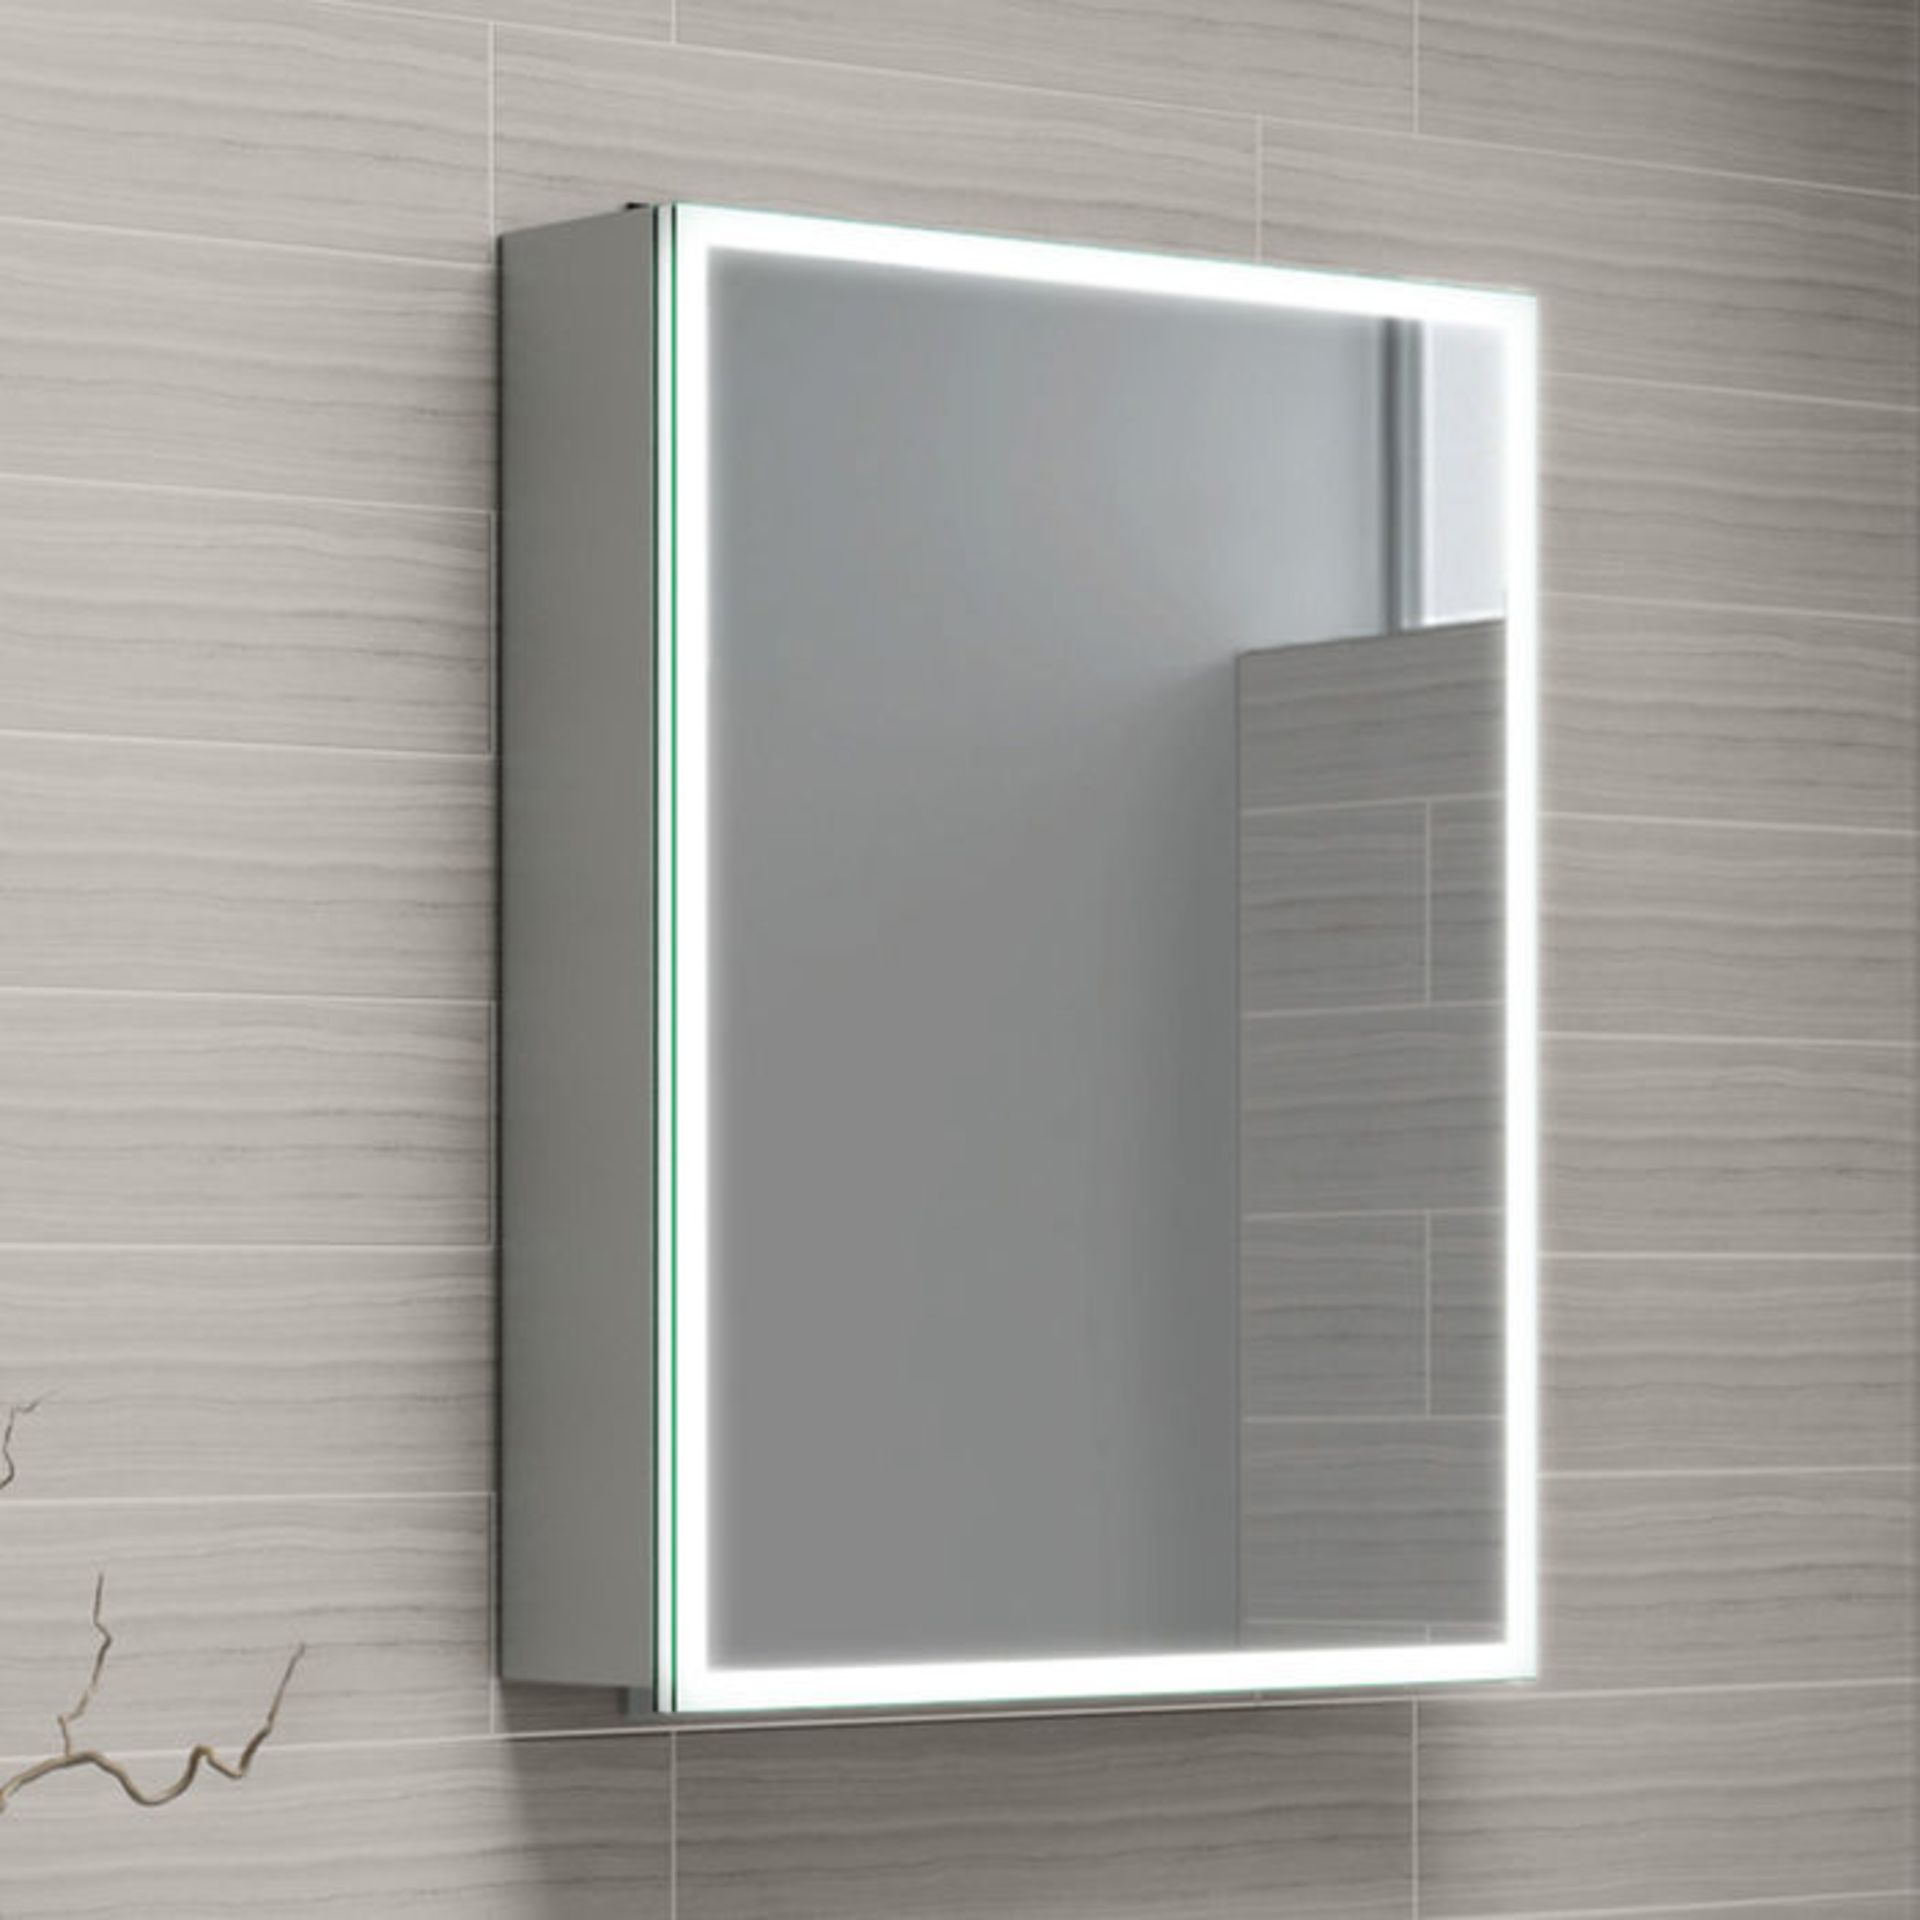 (SP58) 450x600 Cosmic Illuminated LED Mirror Cabinet. RRP £574.99. We love this mirror cabinet as it - Image 4 of 5